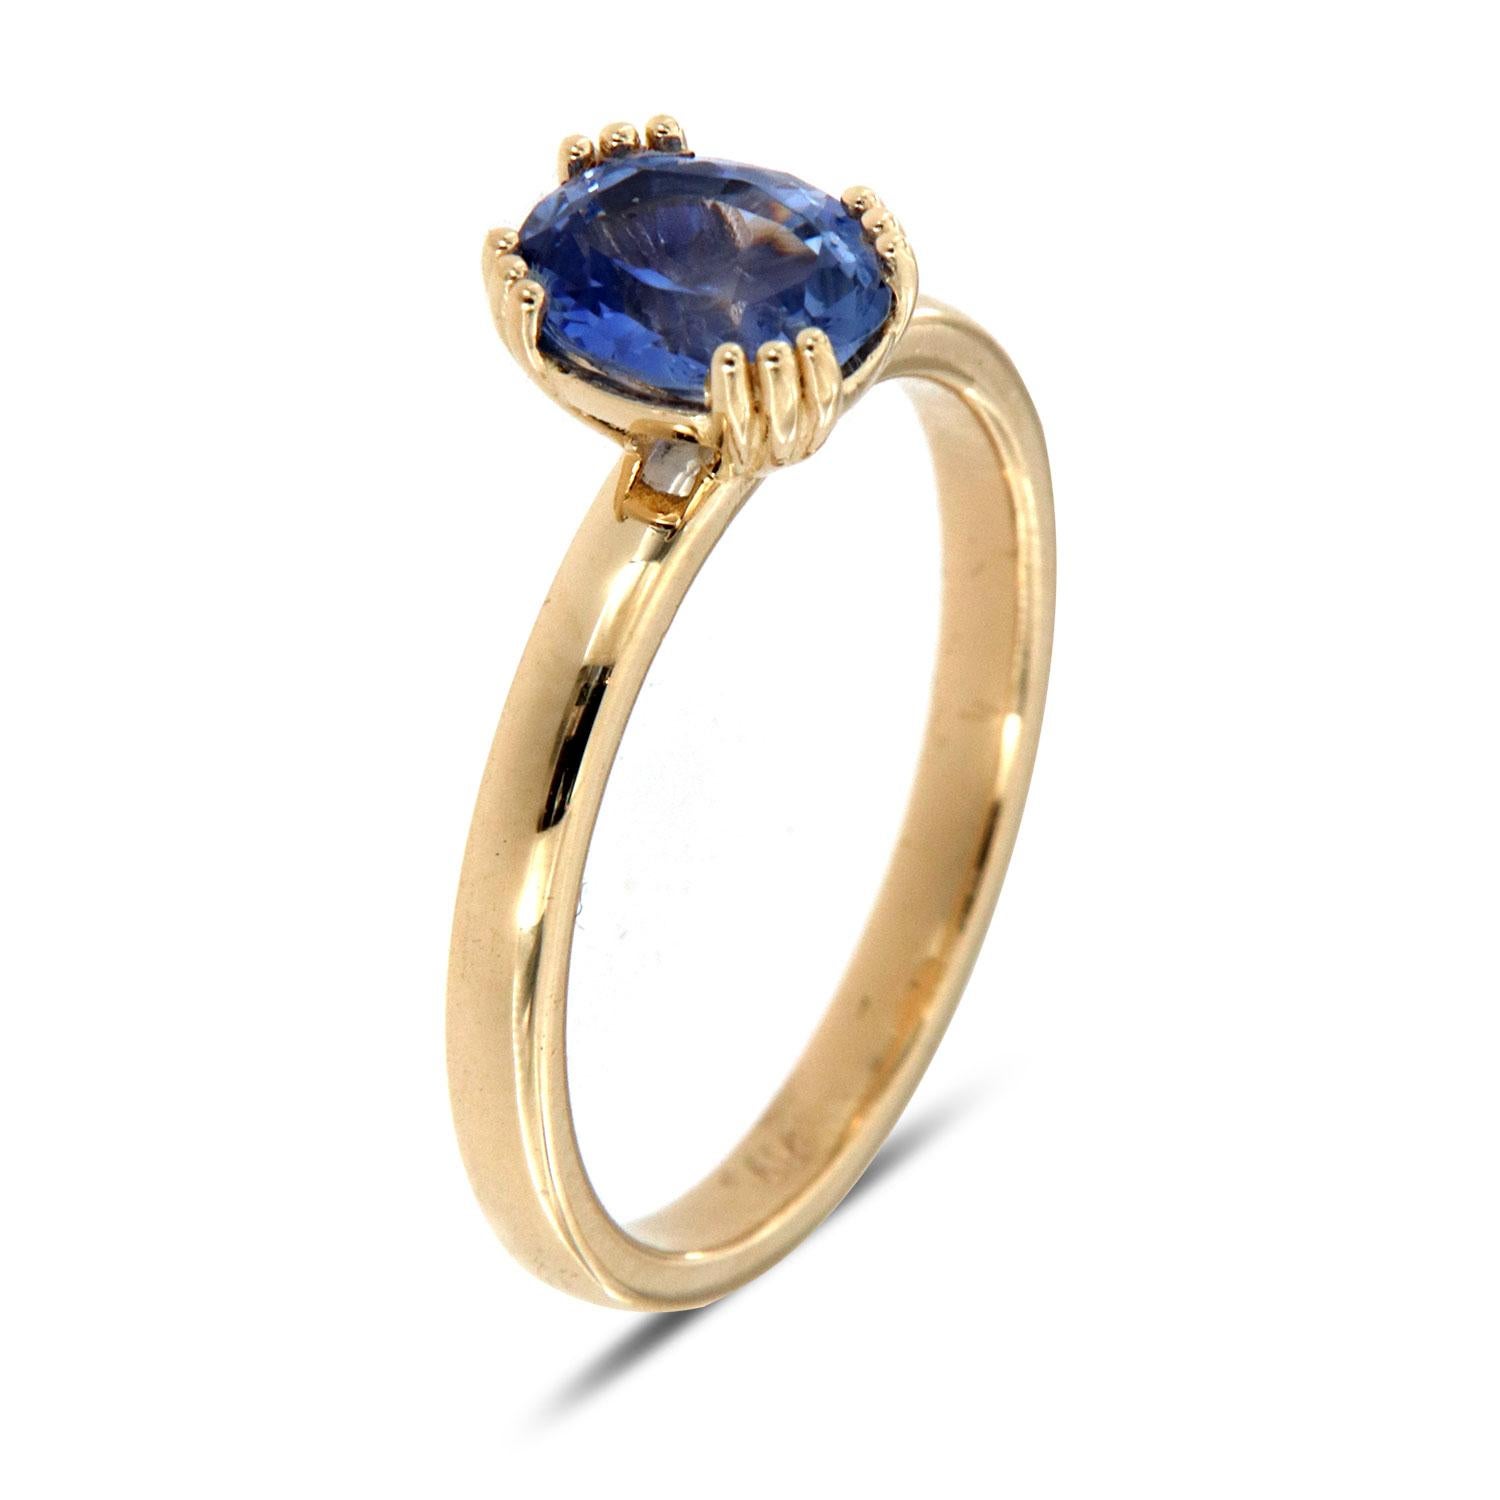 This delicate handcrafted earthy, organically designed ring features a 1.48 Carat Natural Deep Blue color, set in twelve (12) thin prongs. A 2 mm wide shank adds to its rustic style. Experience the difference in person!

Product details: 

Center